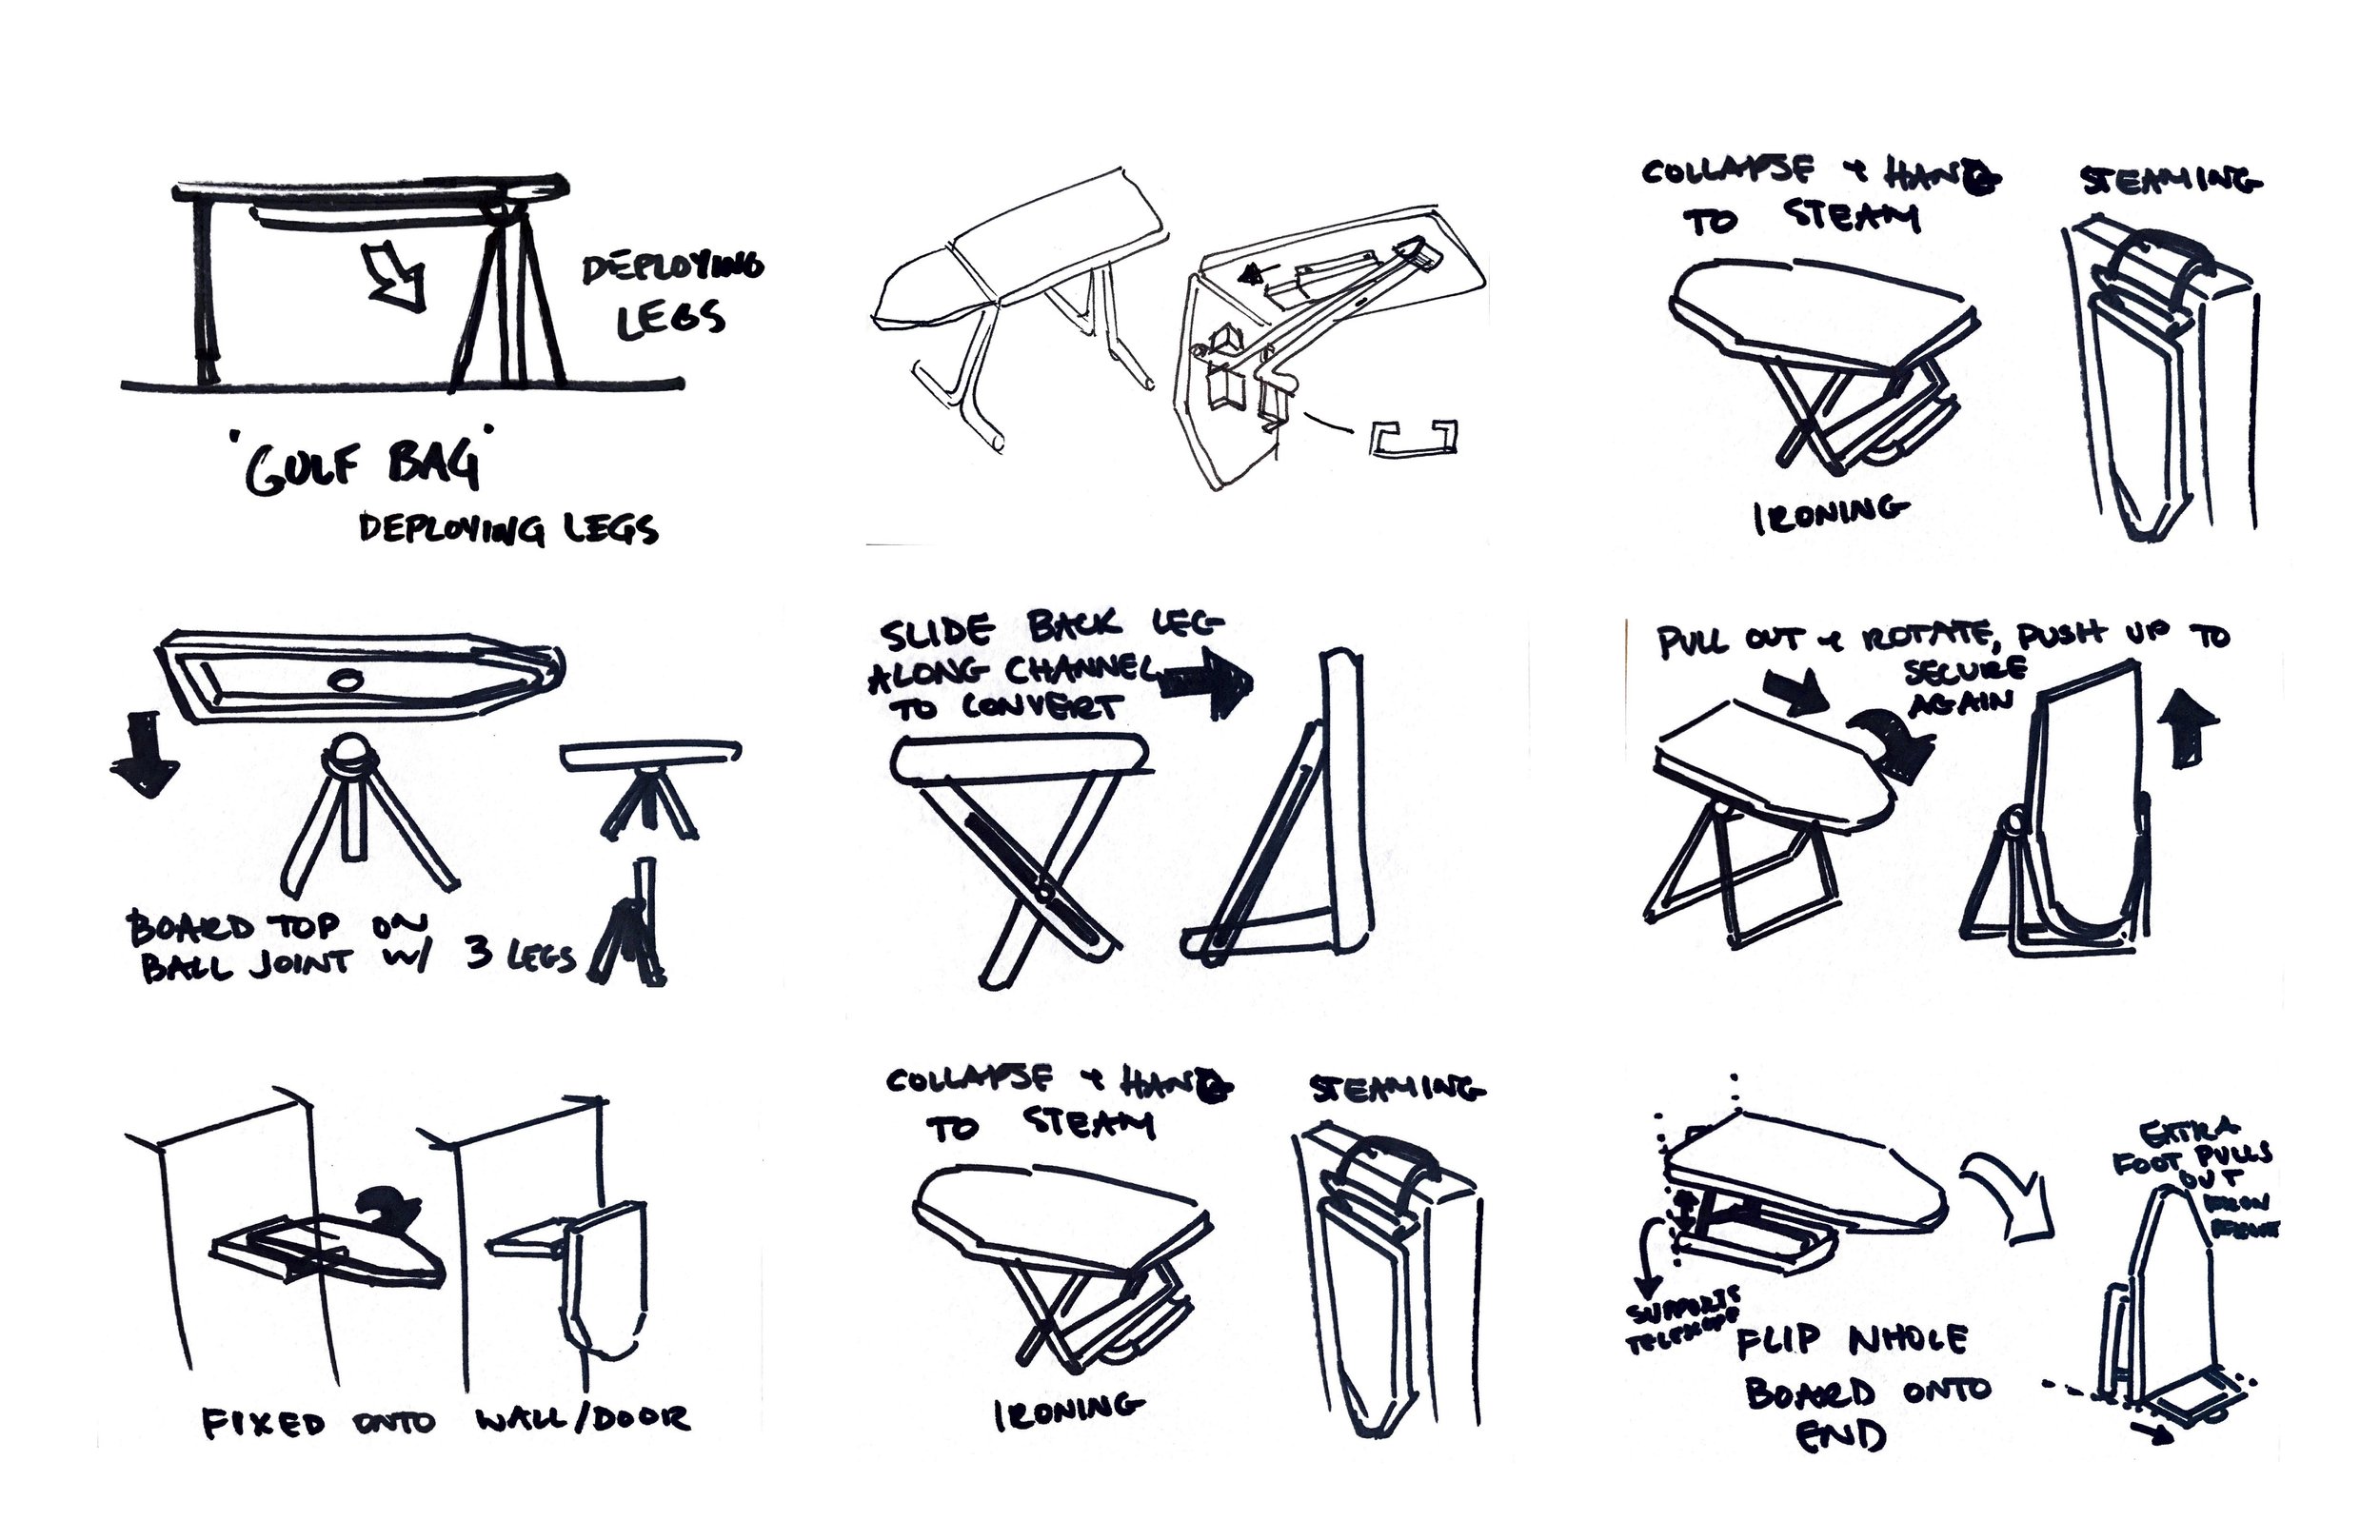 20-0504_HPI_Next Gen Ironing Board_Mechanism Exploration_Concepts only_Page_5.jpg